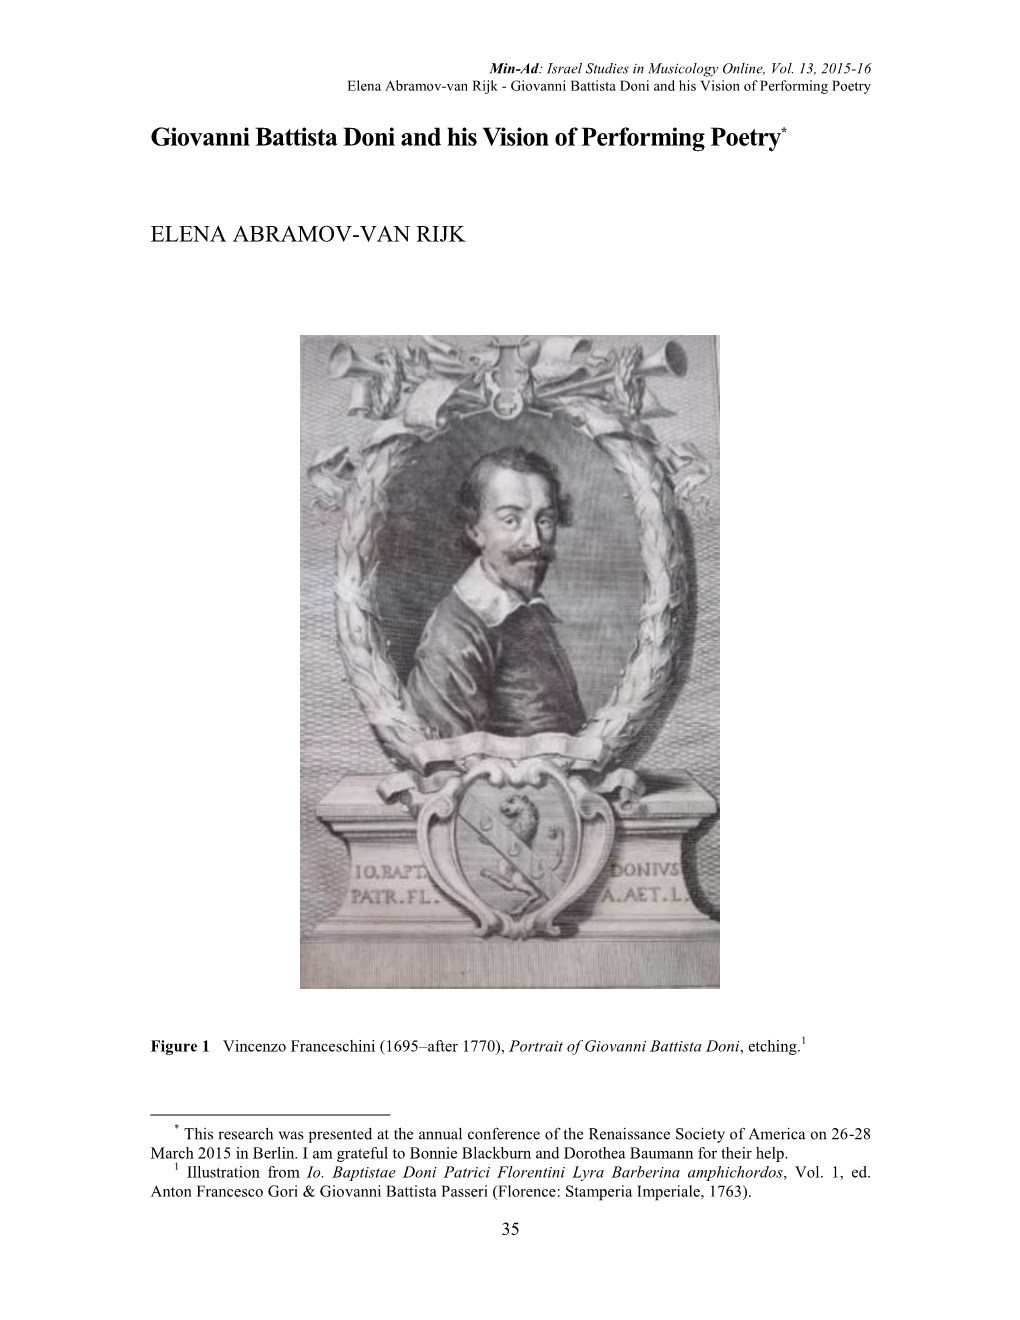 Giovanni Battista Doni and His Vision of Performing Poetry*